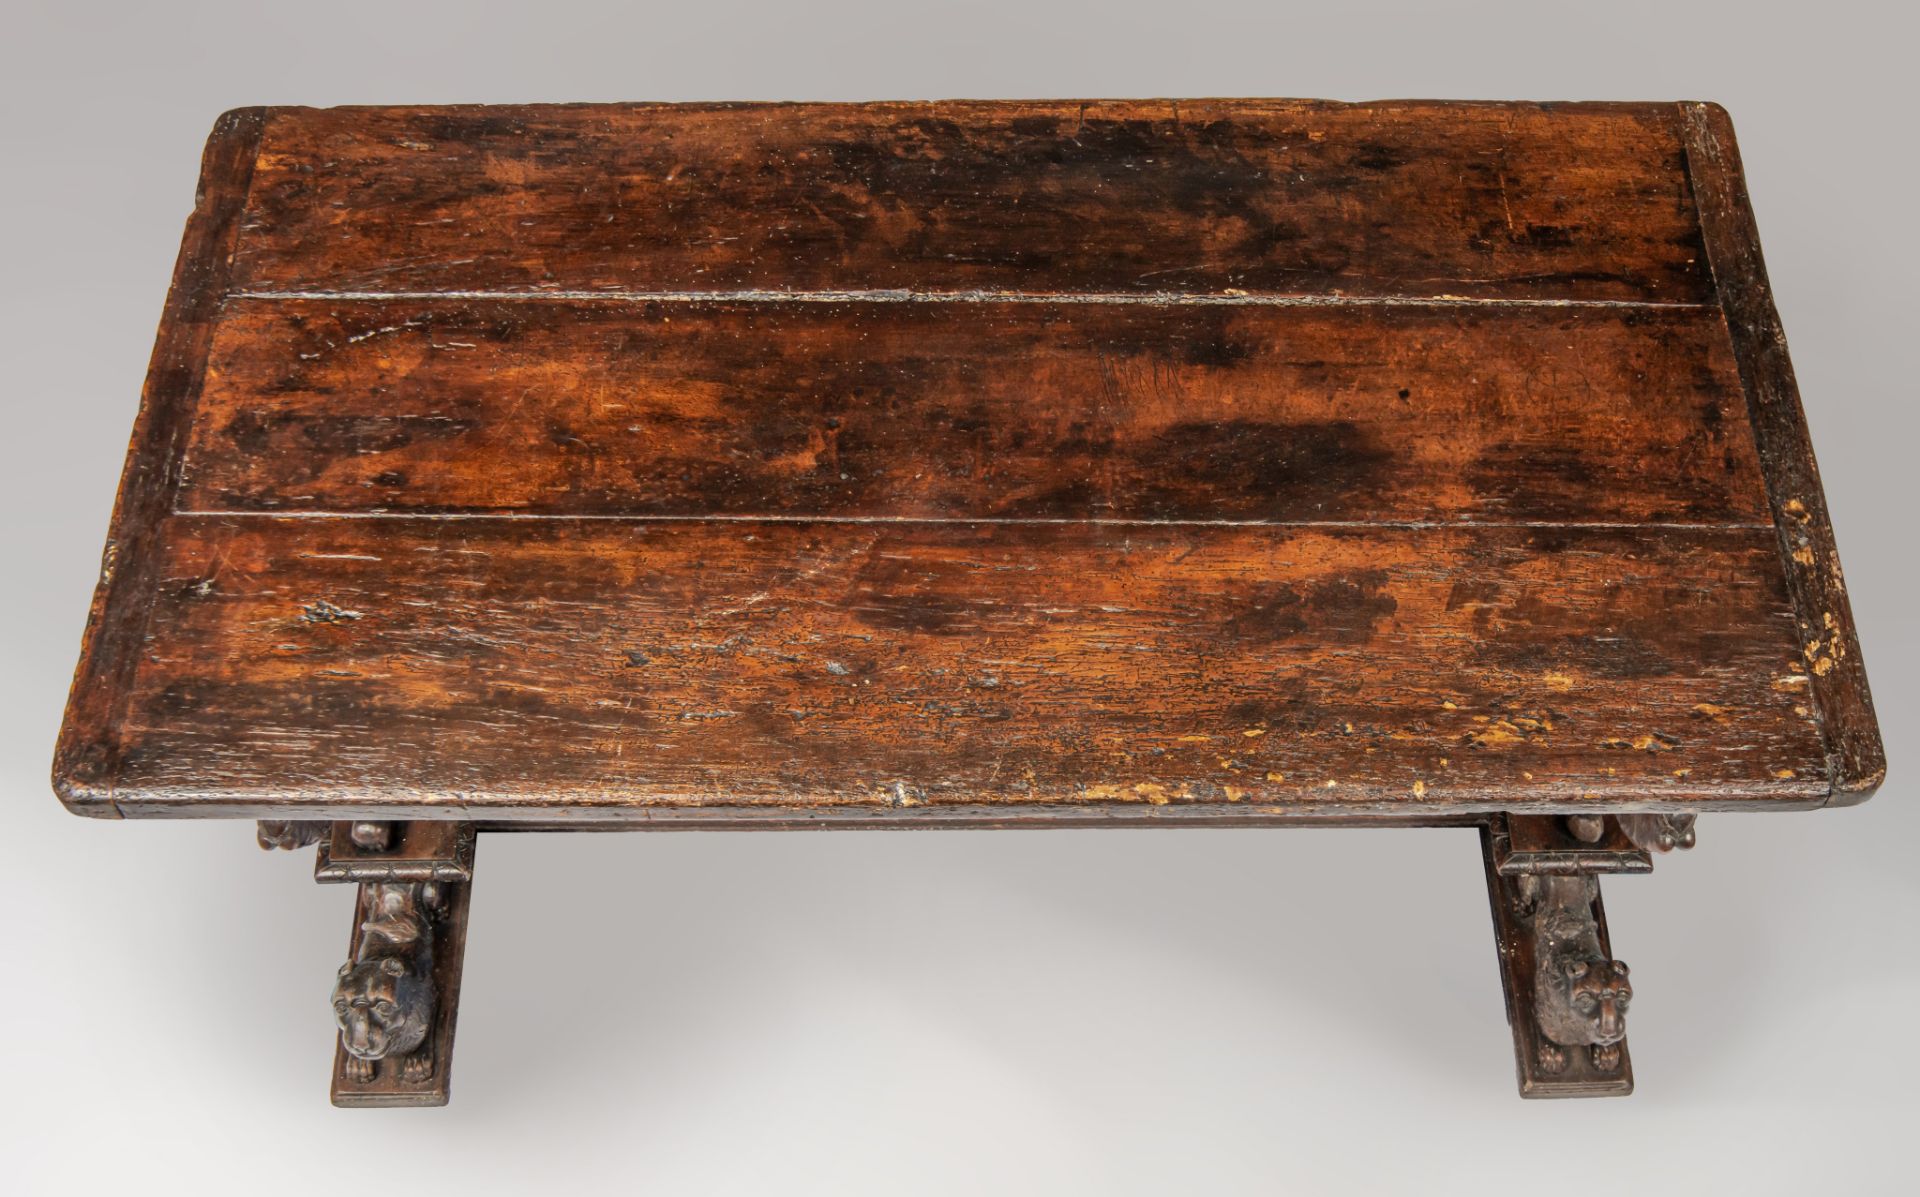 An exceptional Italian Renaissance carved walnut centre table, 16th/17thC, H 82 - W 165 - D 86,5 cm - Image 7 of 12